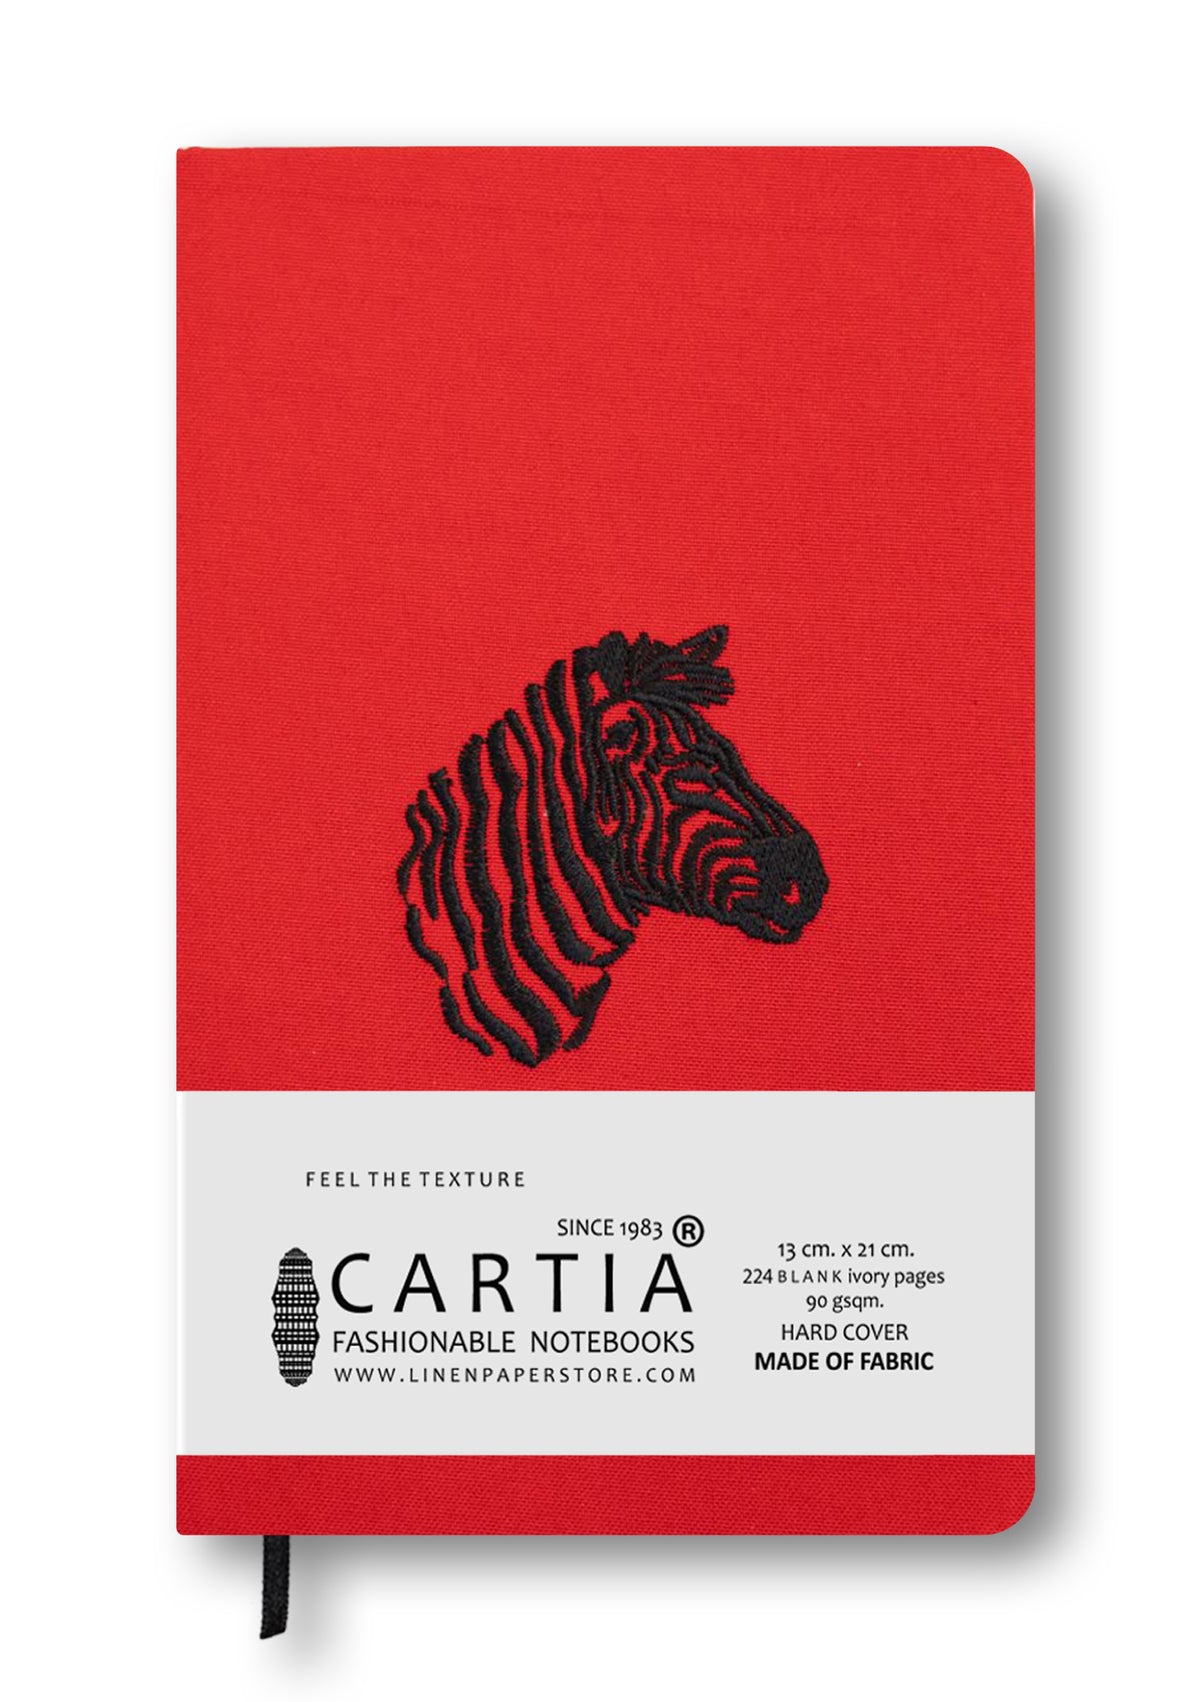 FABRIC HARDCOVER EMBROIDERY BLANK NOTEBOOK BLACK ZEBRA [RED]